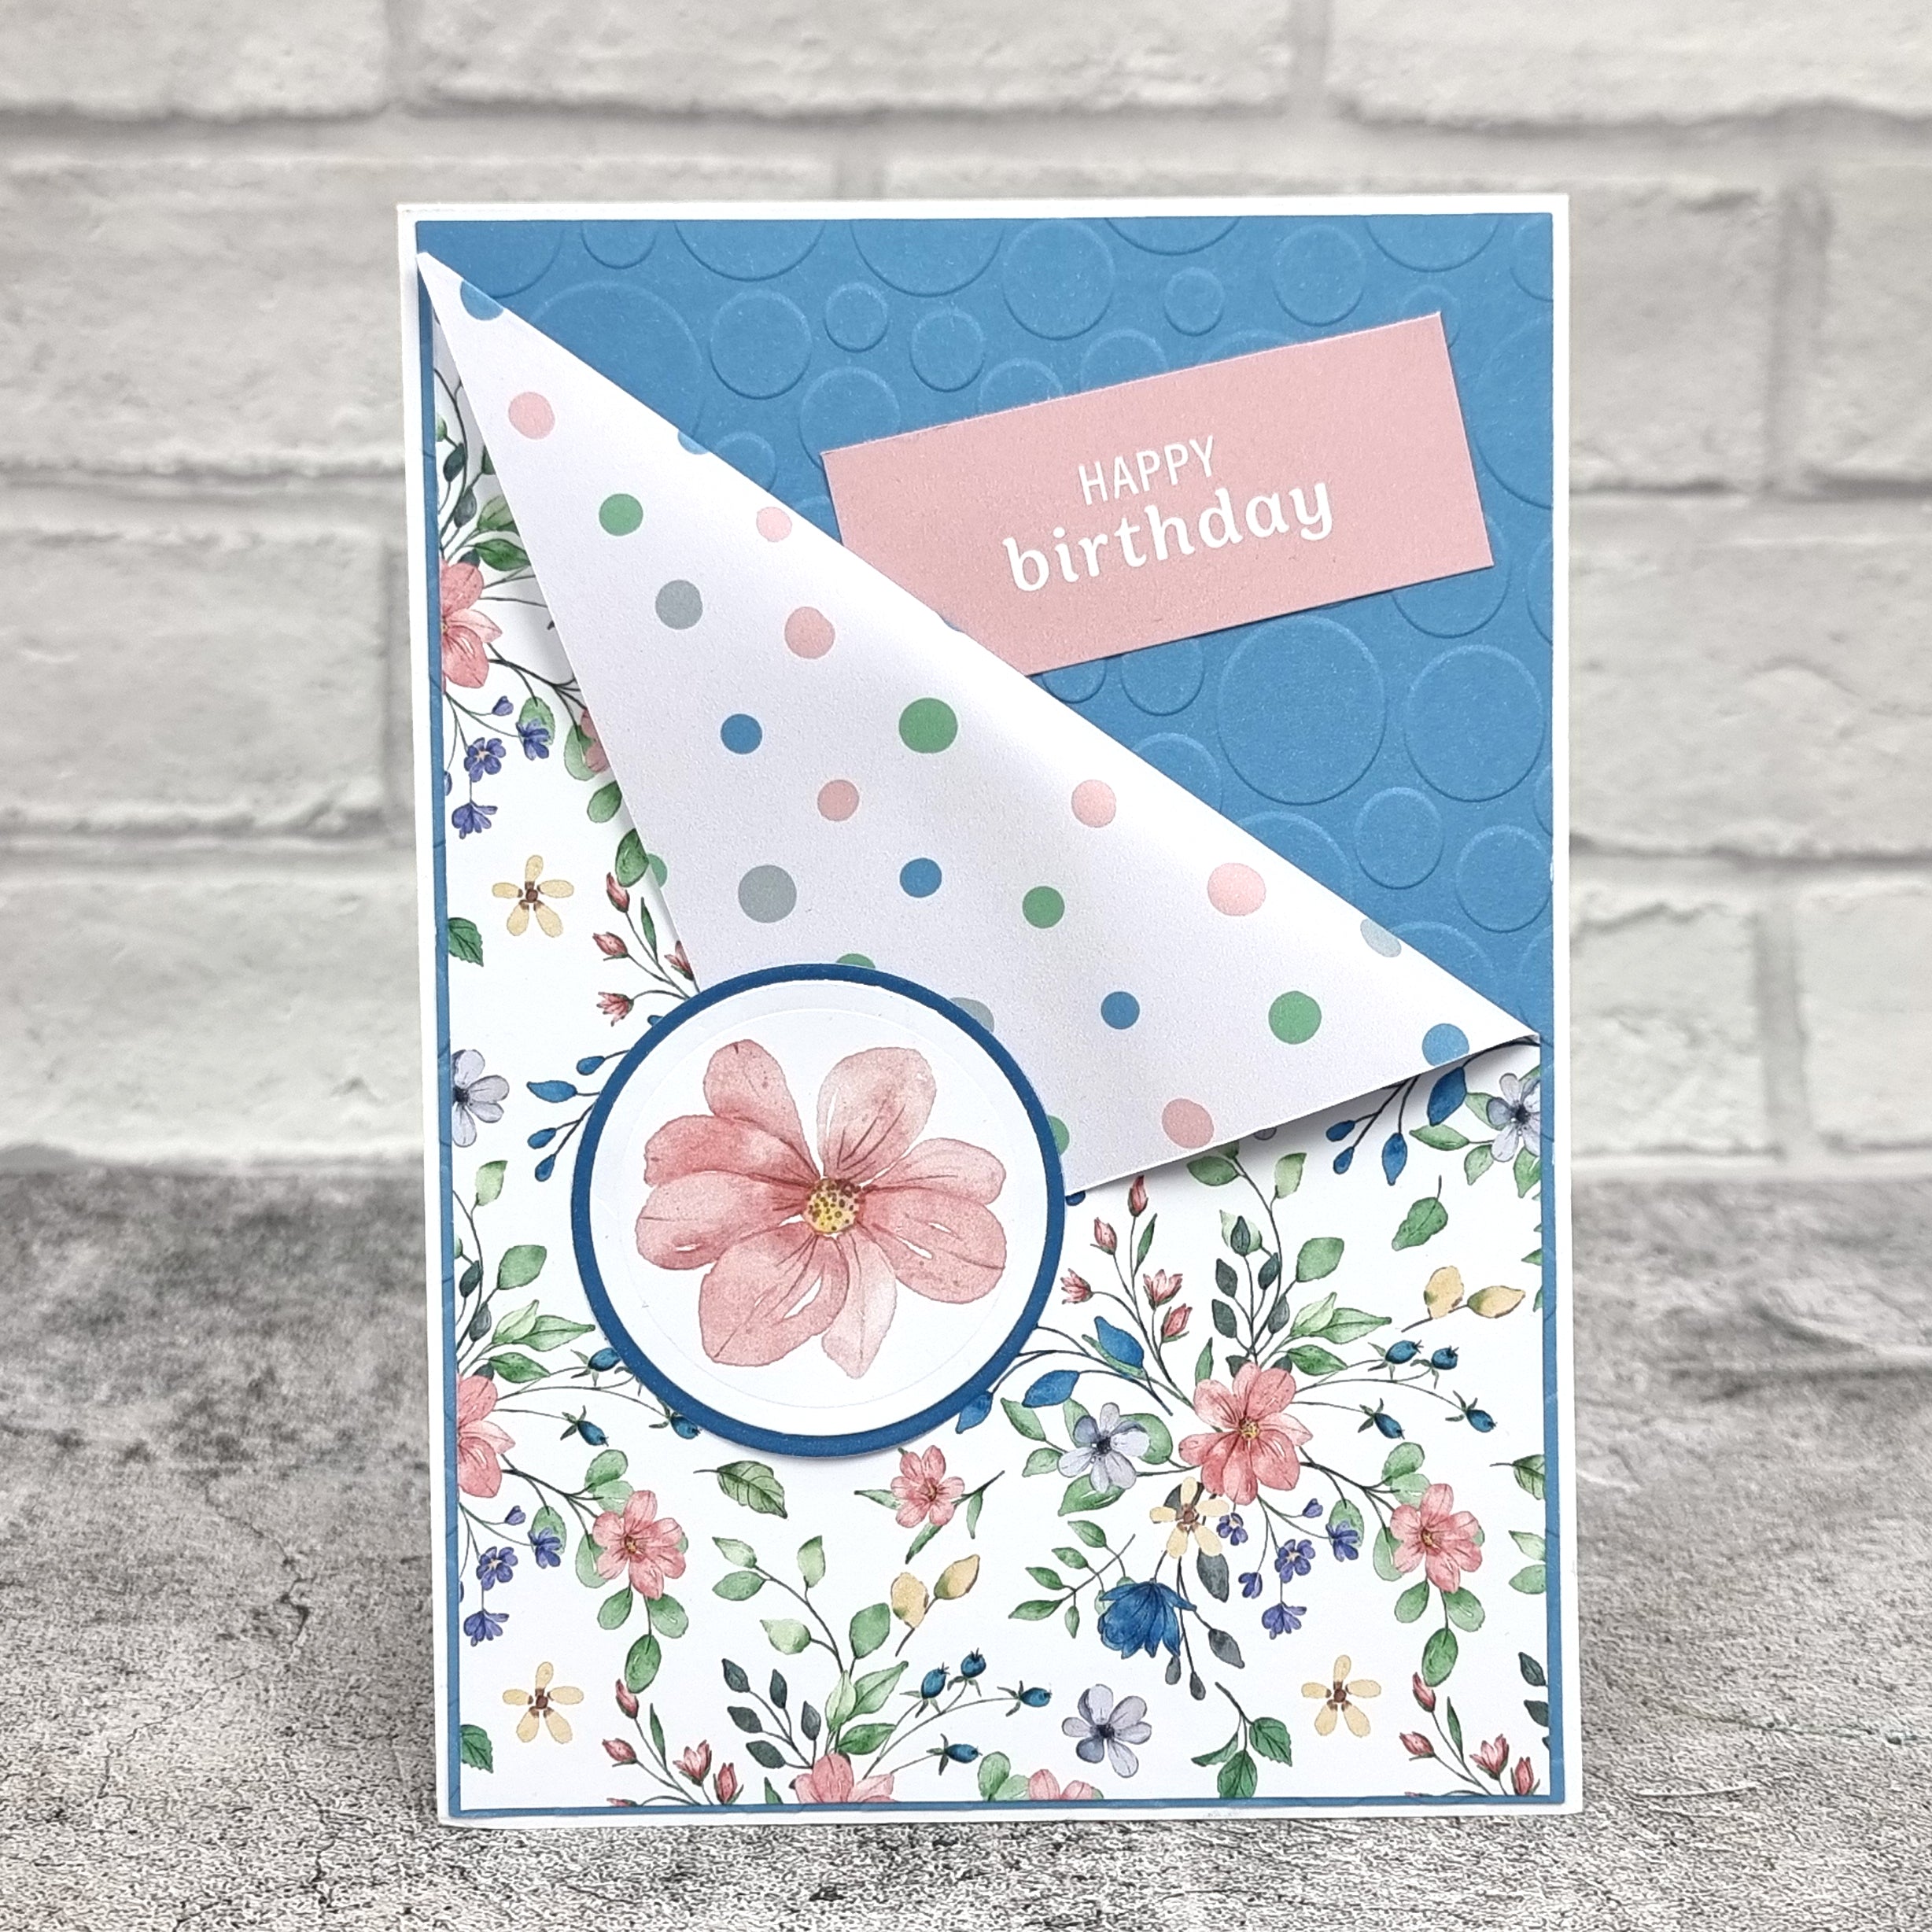 The Paper Boutique Sunny Gardens 12 in x 12 in Decorative Paper Pad